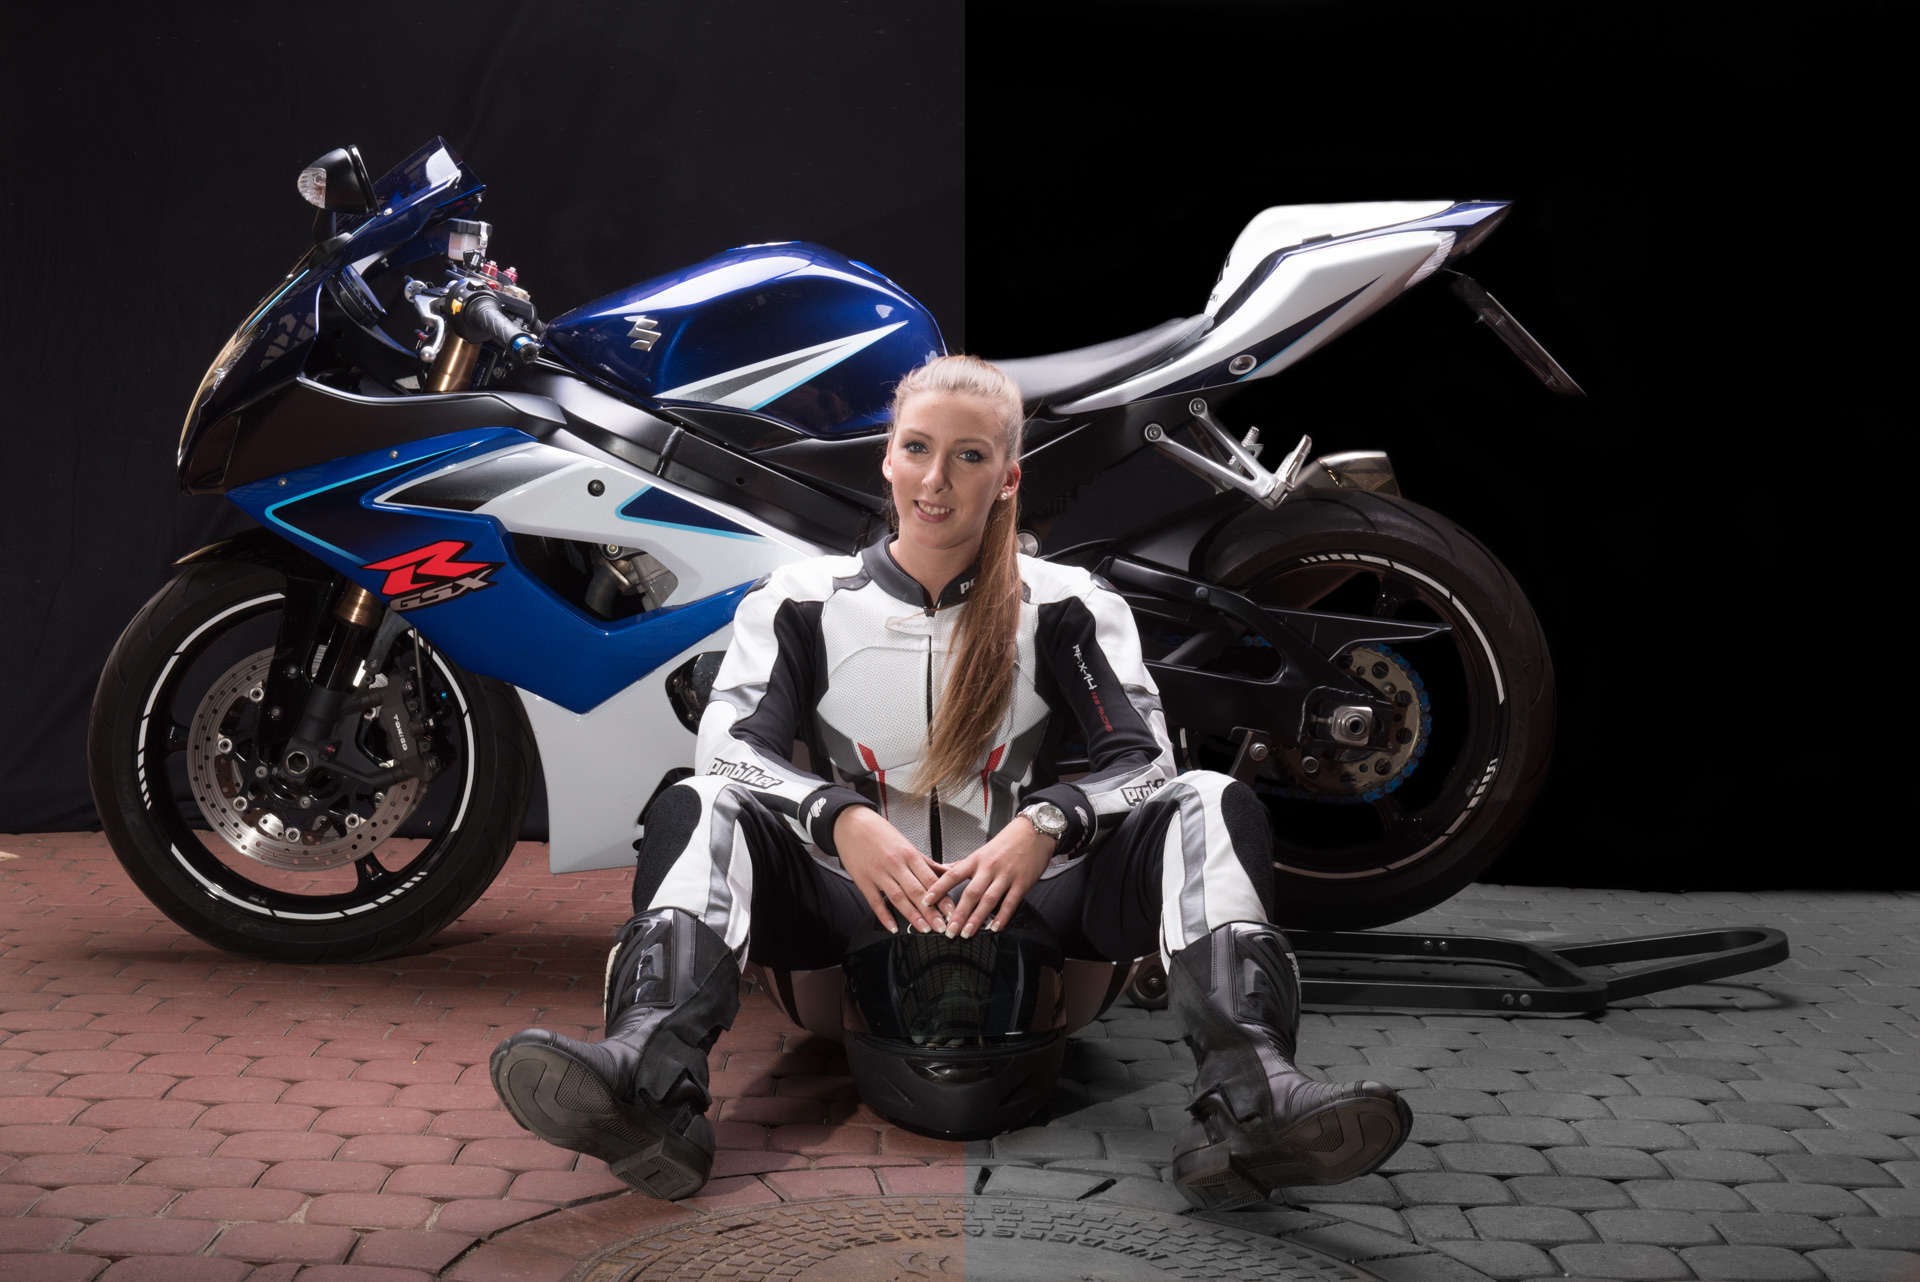 Video: Post-processing a motorcycle studio image